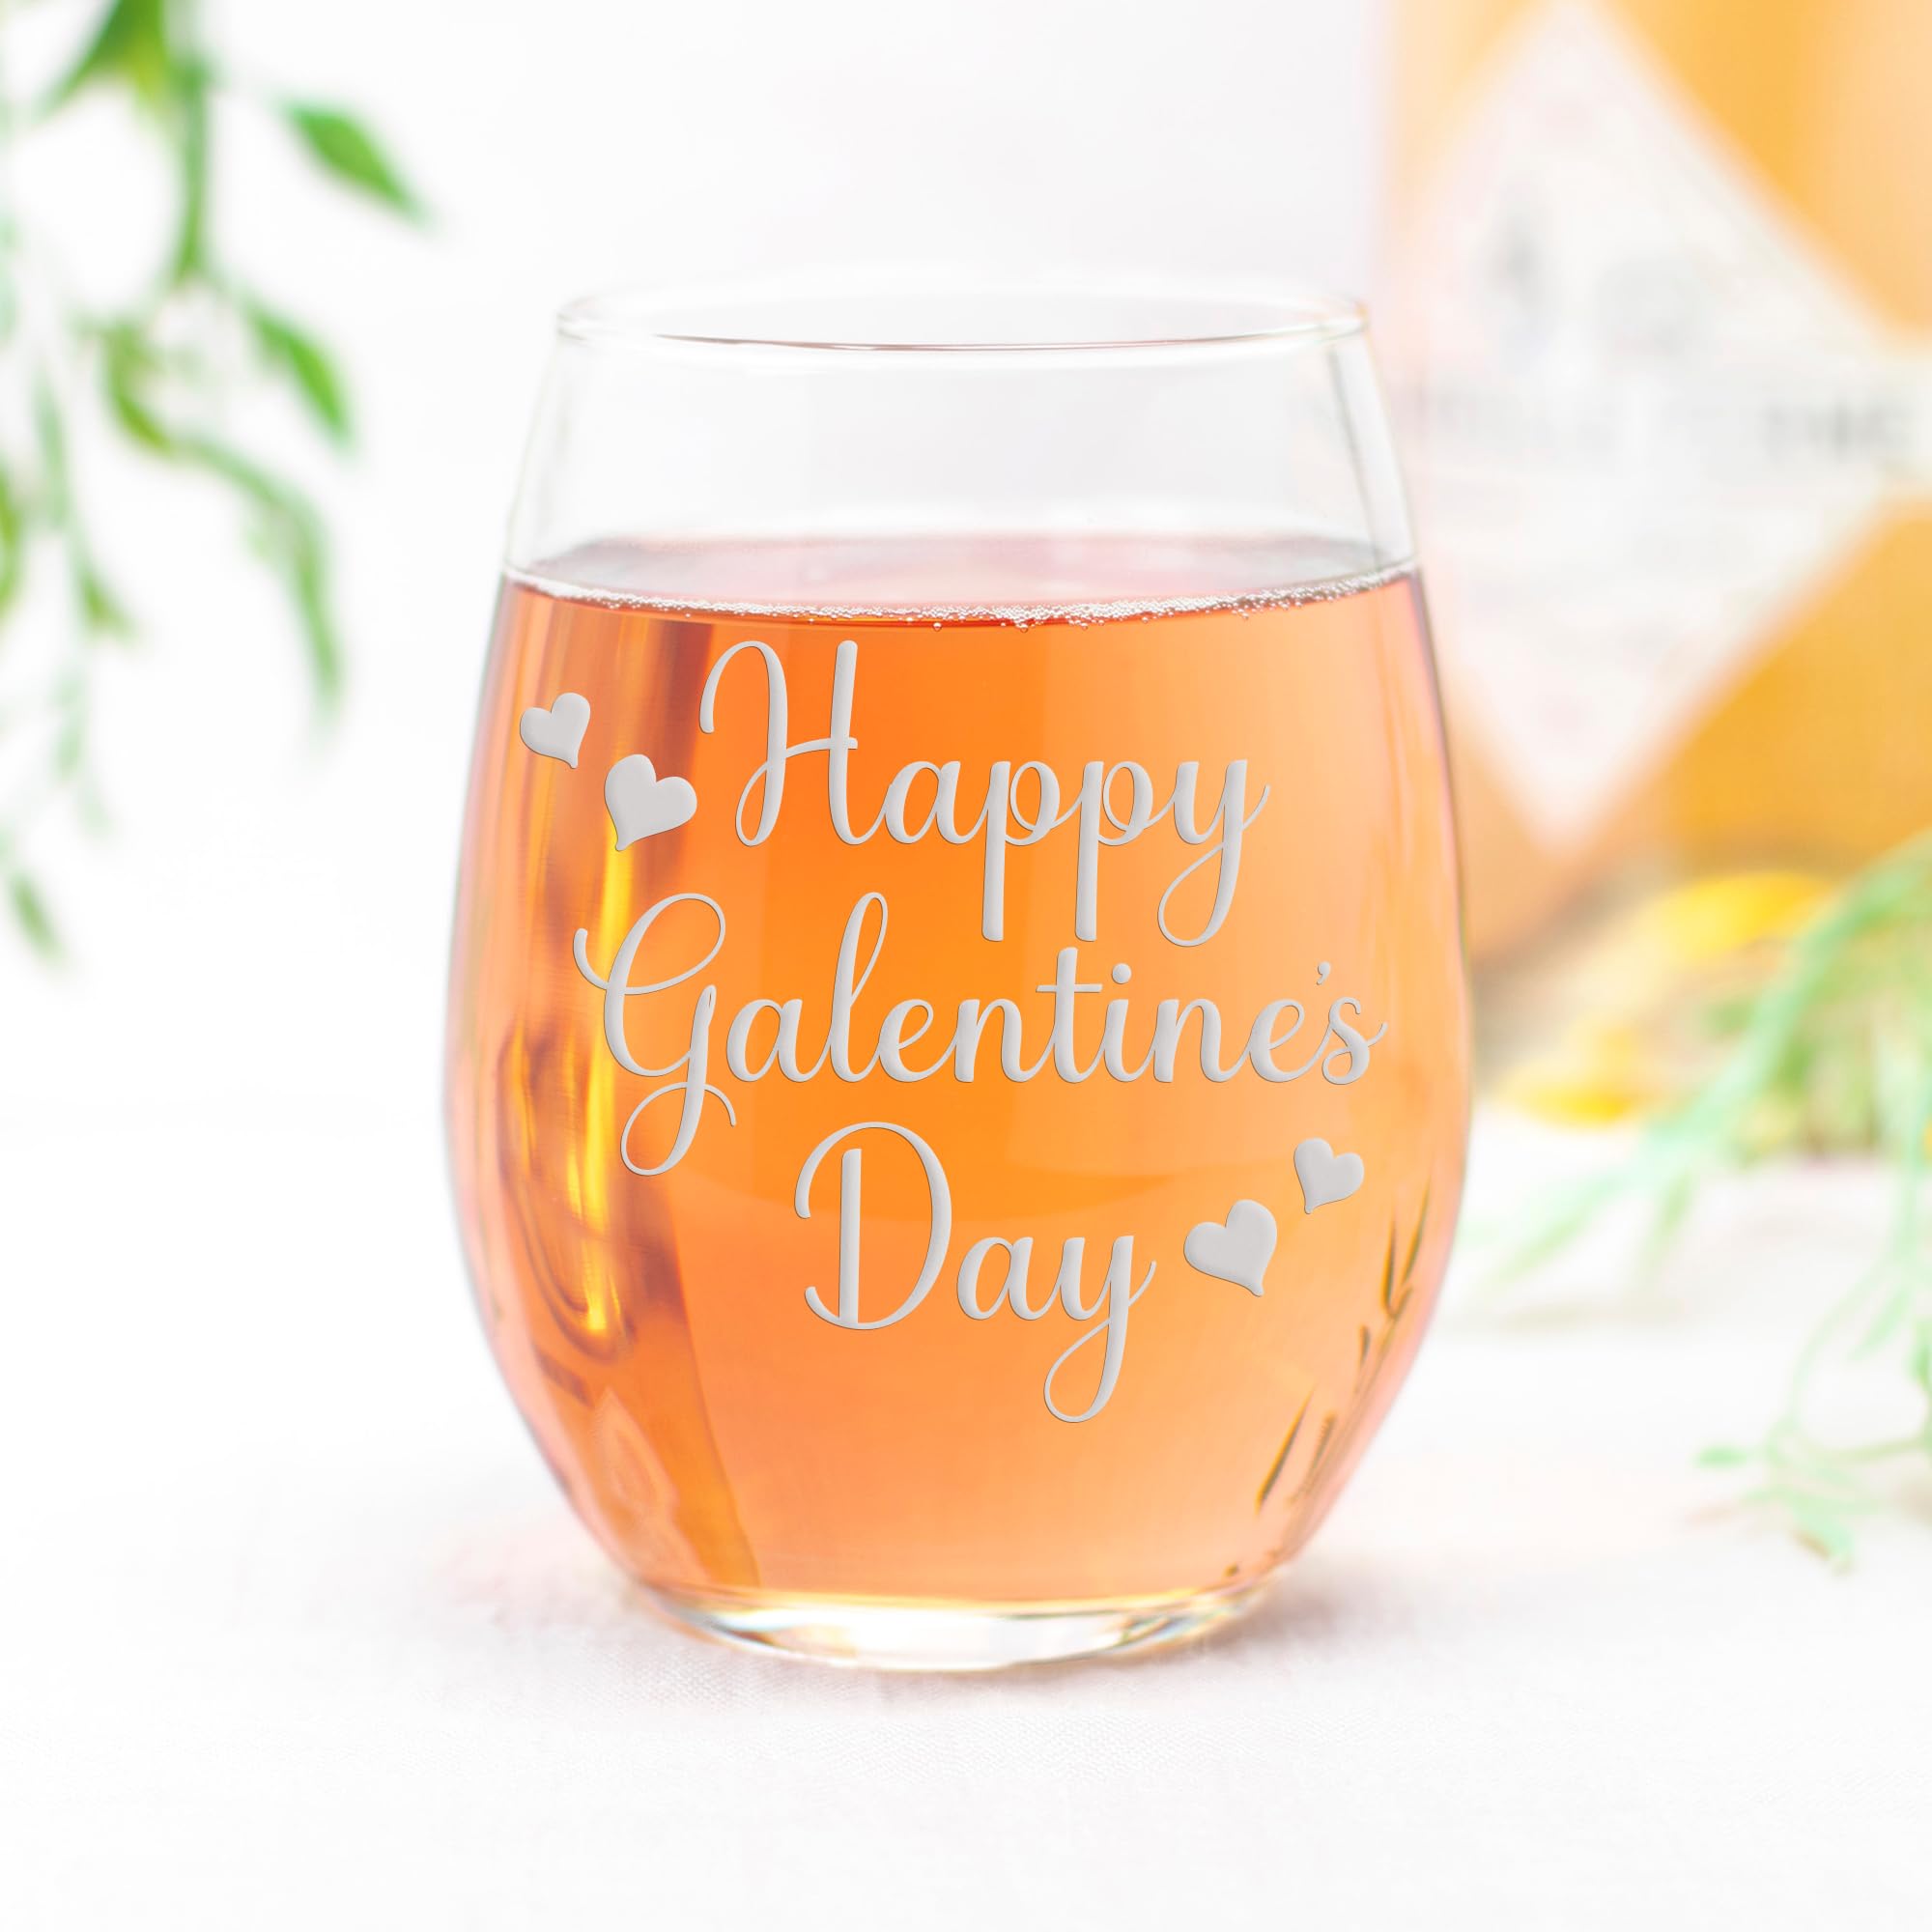 Happy Galentines Day 4 Hearts Stemless Wine Glass - Valentines Day Gift, Galentines Gift, Valentines Day Wine Glass, Galentines Wine Glass